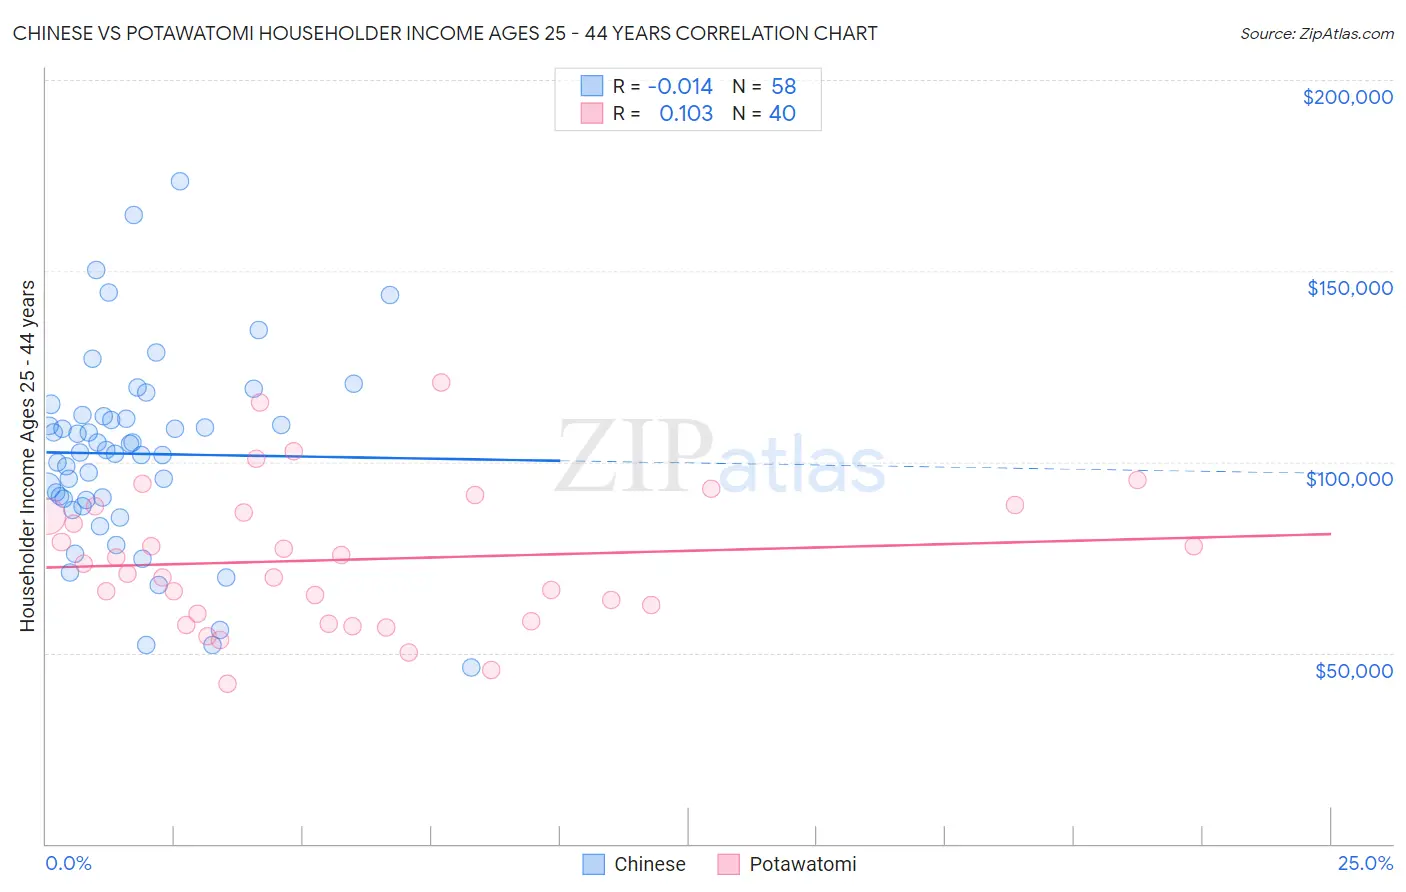 Chinese vs Potawatomi Householder Income Ages 25 - 44 years